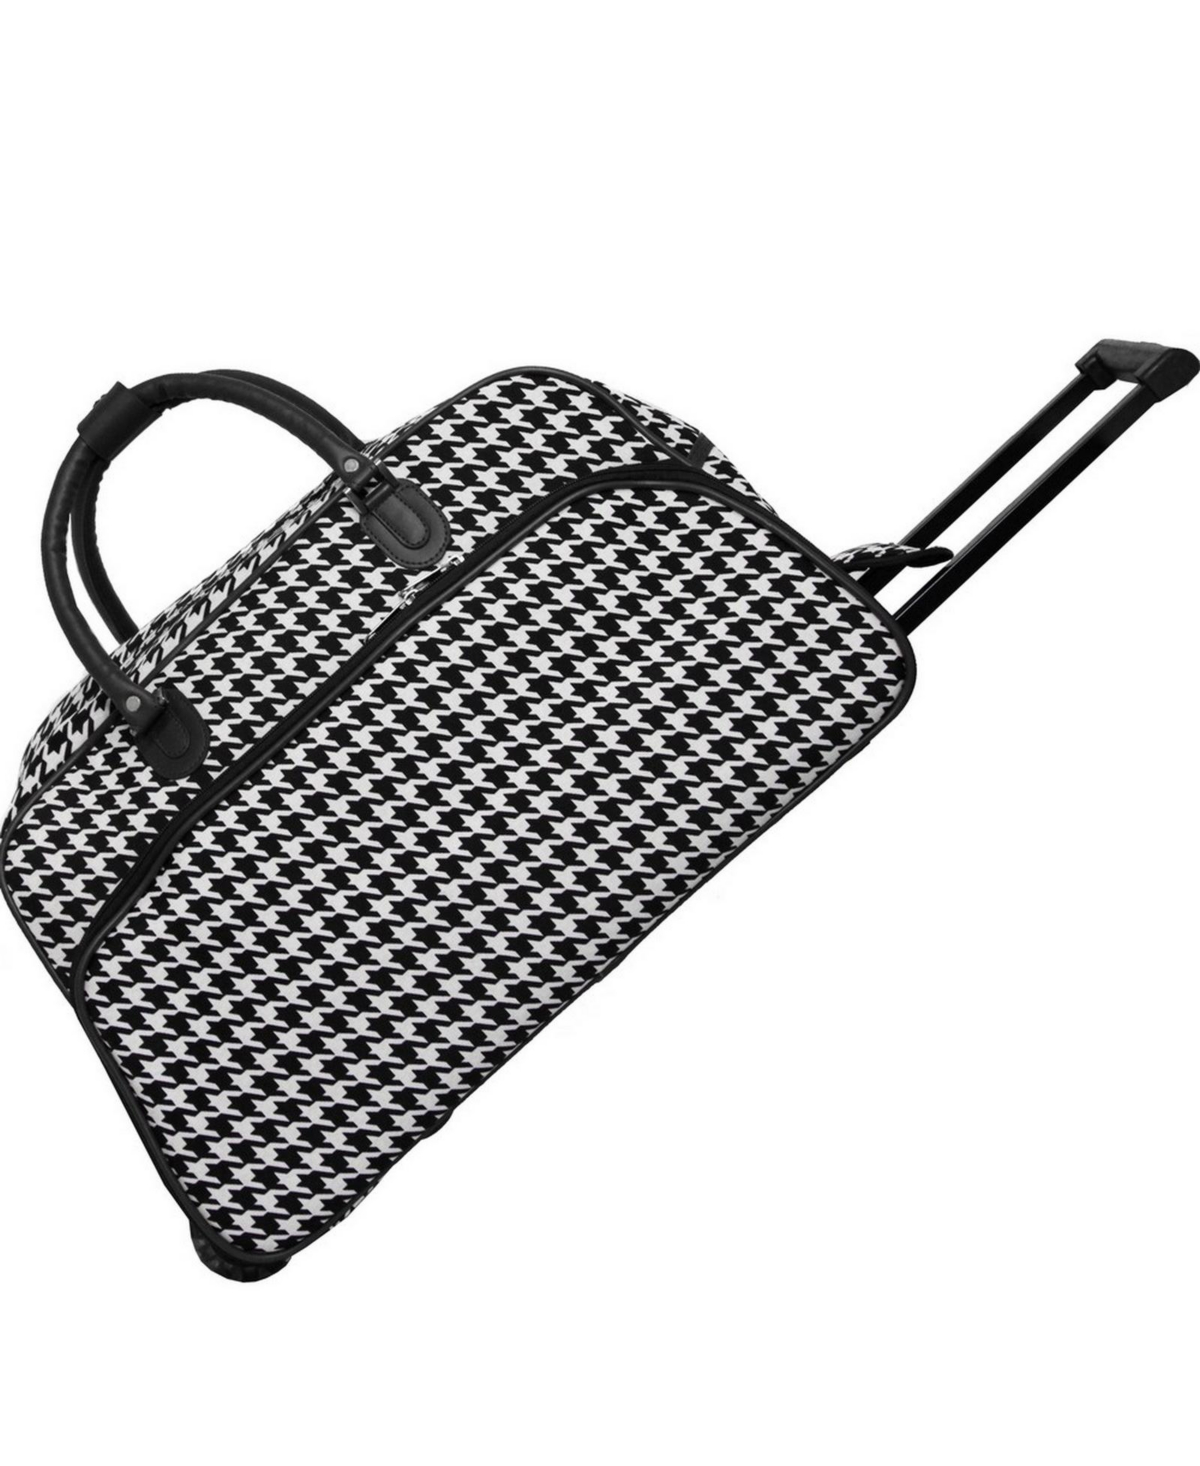 Hounds tooth 21-Inch Carry-On Rolling Duffel Bag - Black trim houndstooth